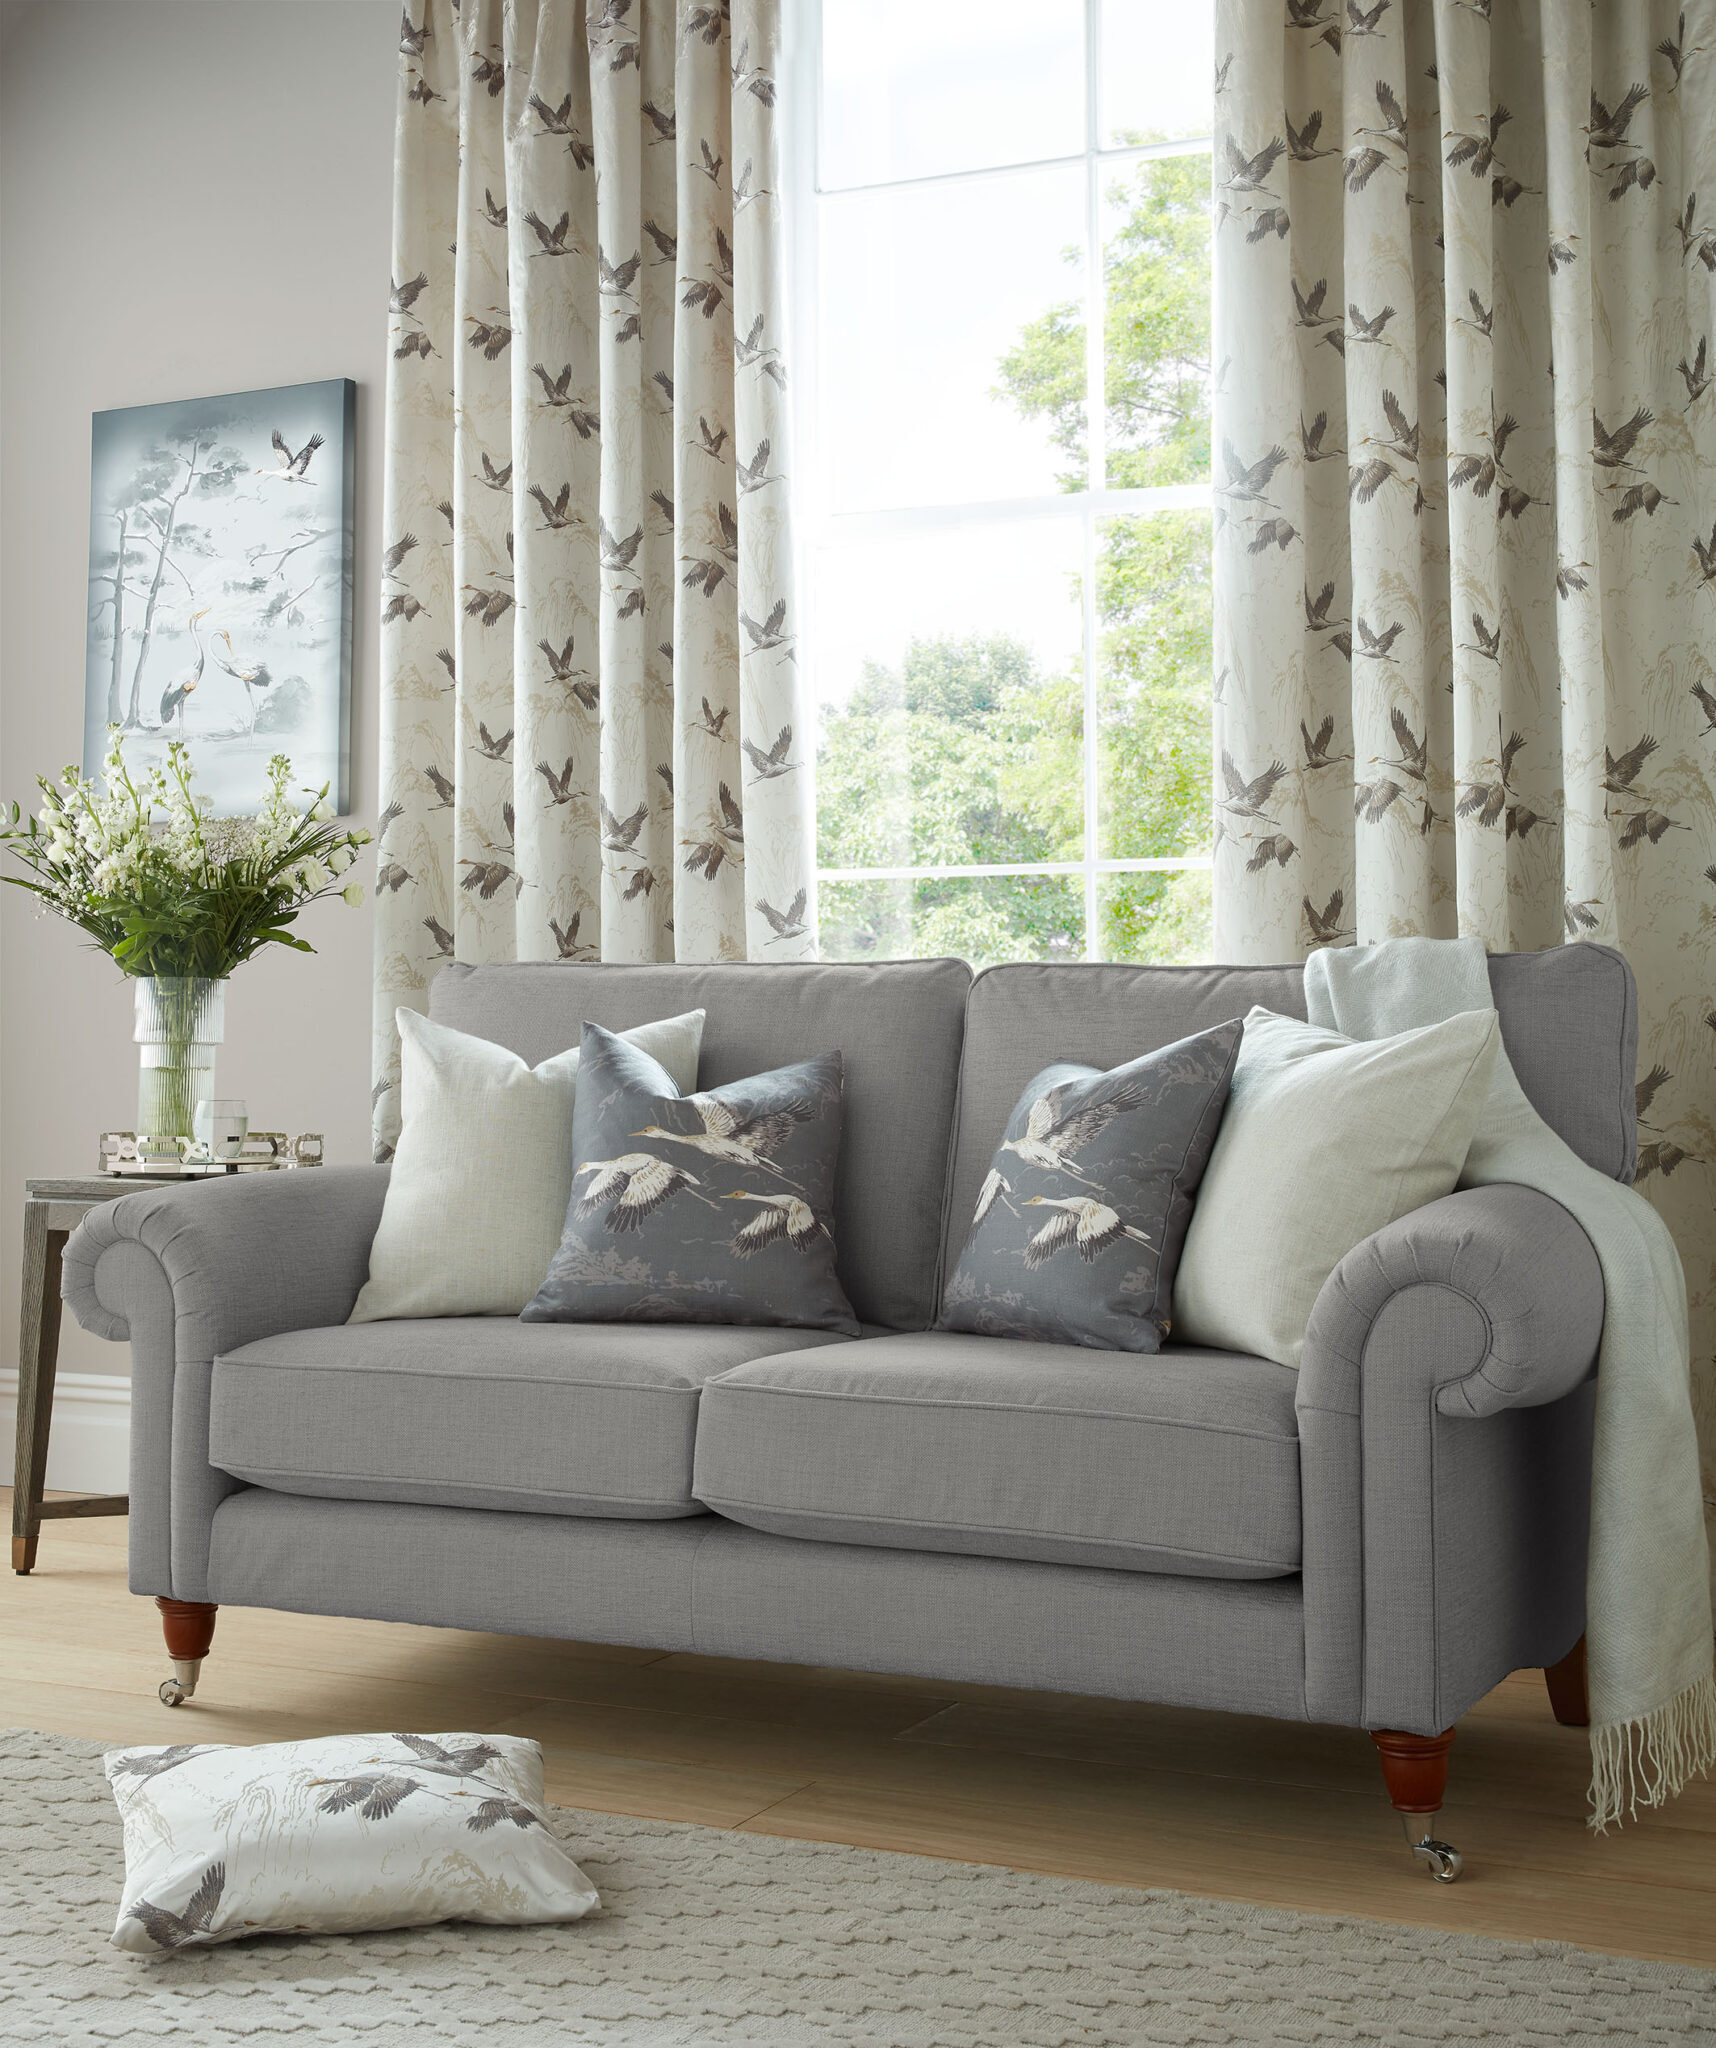 Laura Ashley Curtains And Roman Blinds